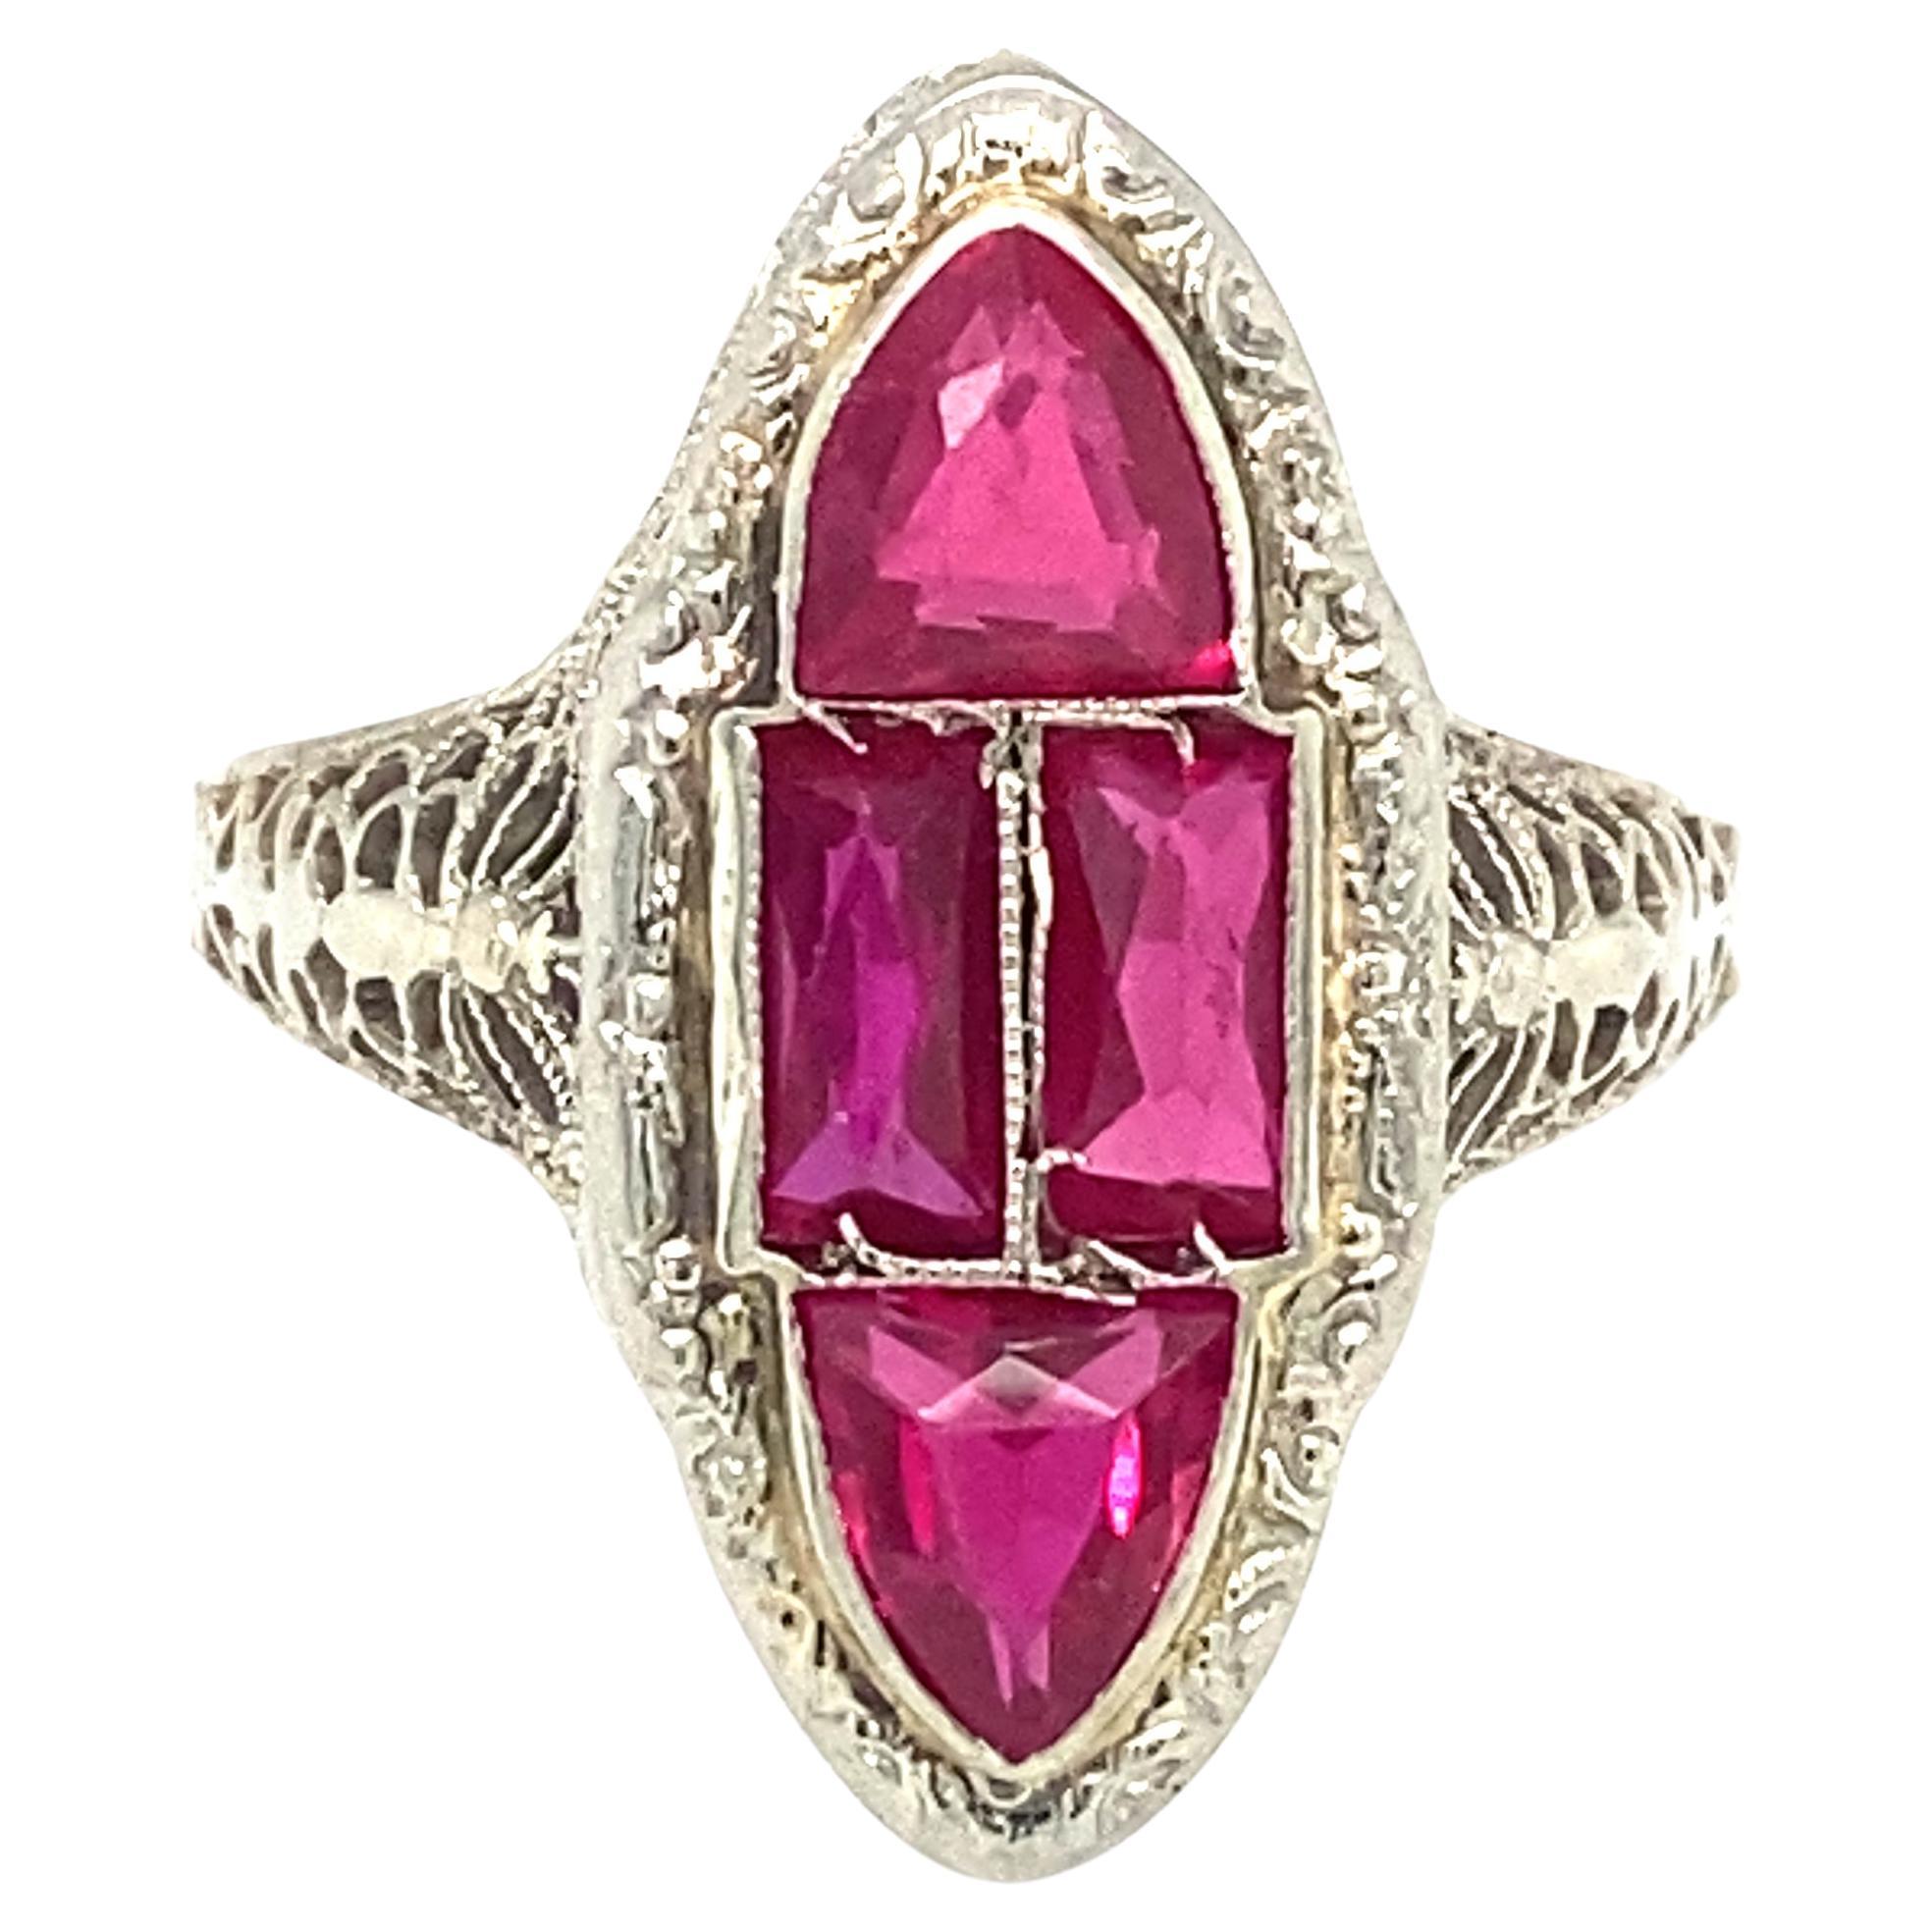 Circa 1920s Art Deco Simulated Ruby Cocktail Ring in 14 Karat White Gold For Sale